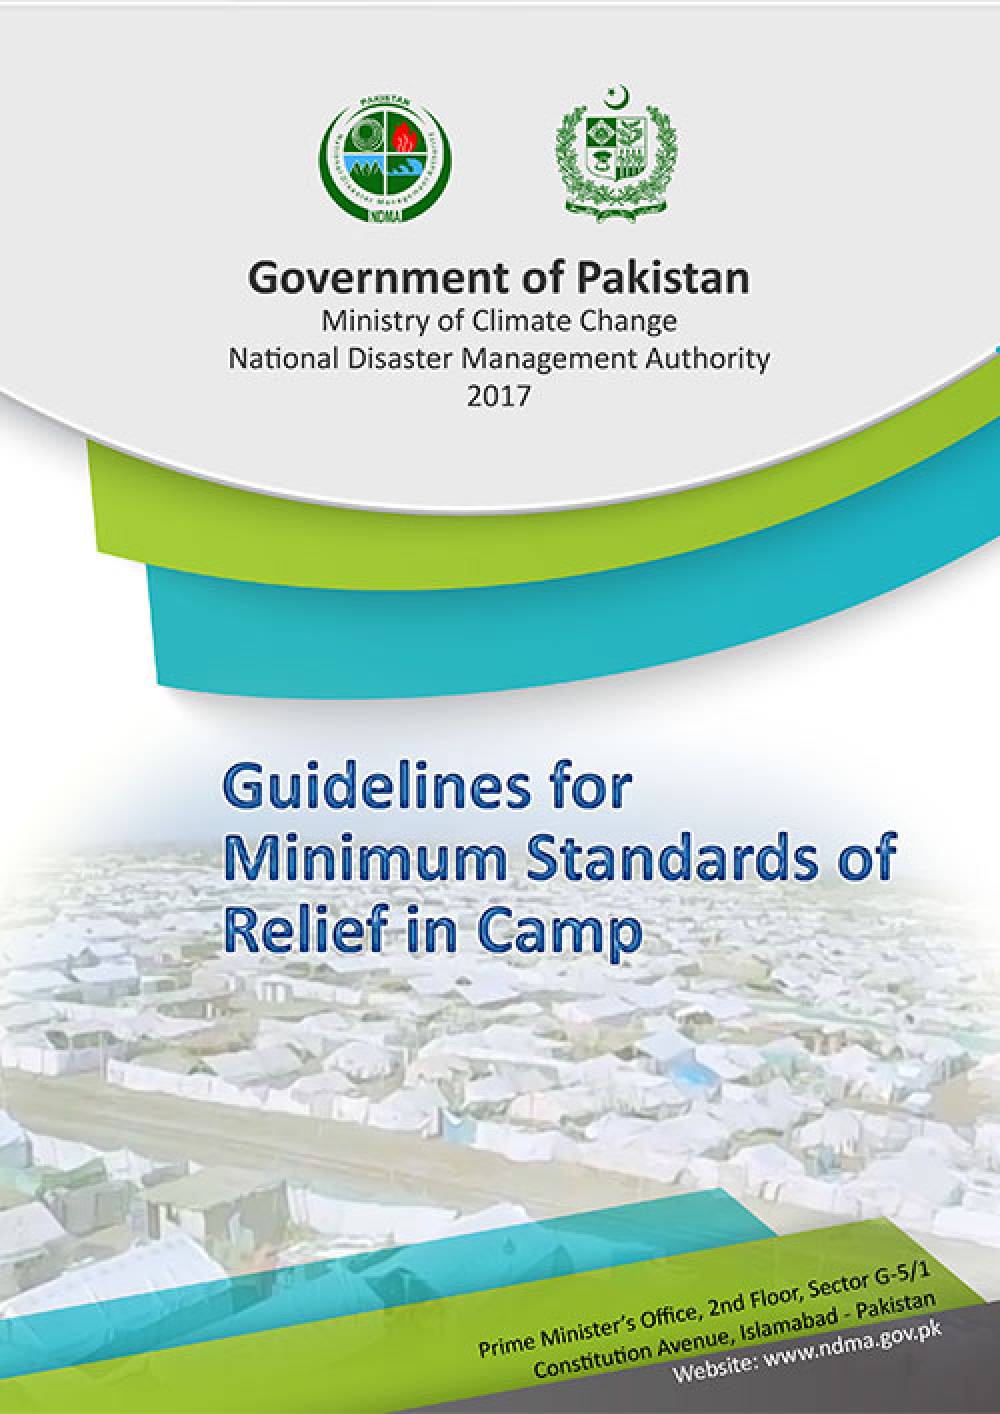 Guidelines for Minimum Standards of Relief in Camp